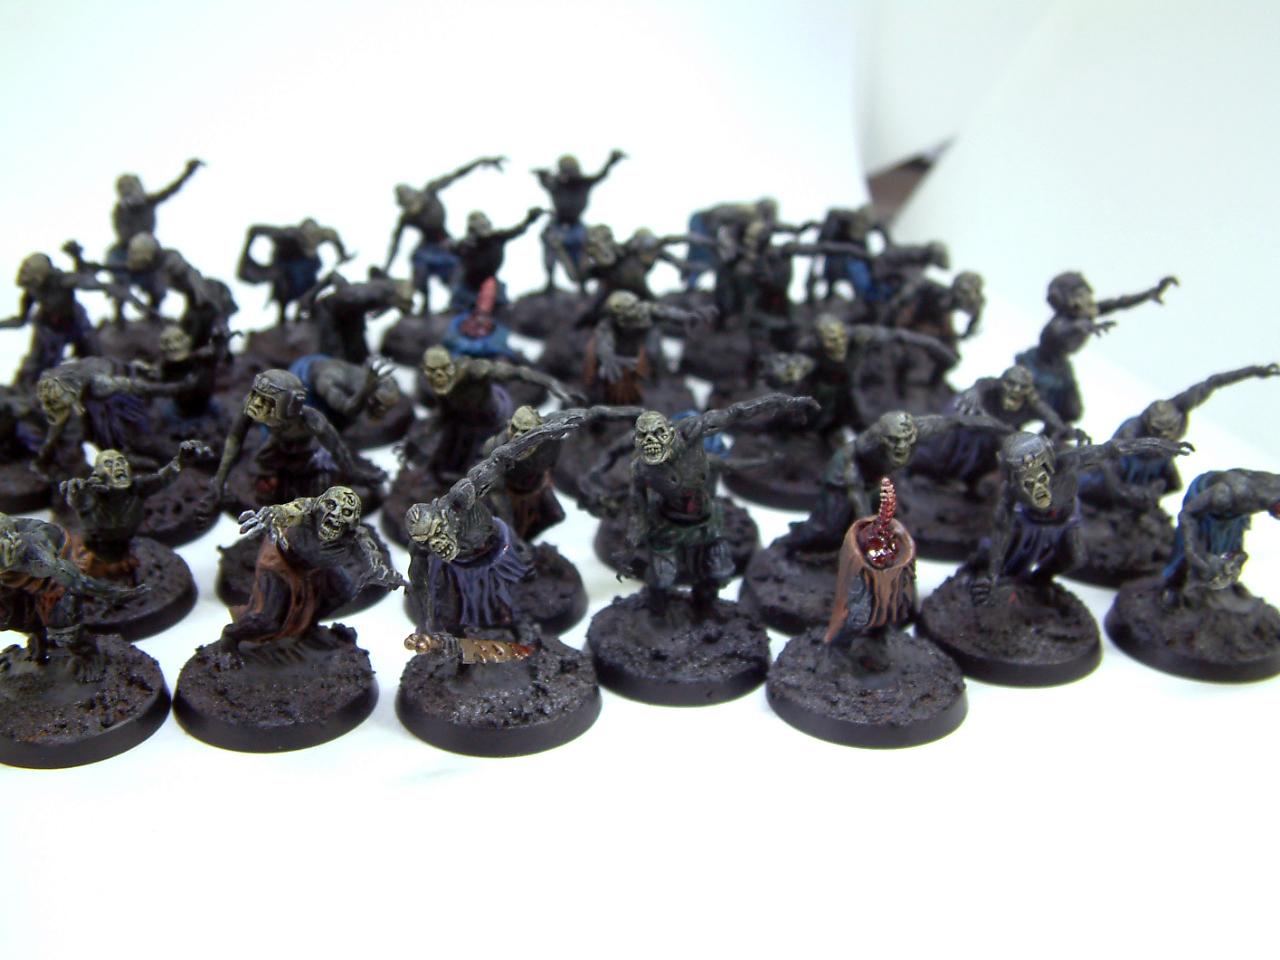 Chaos, Mantic, Nurgle, Poxwalkers, Renegades And Heretics, Warhammer 40,000, Zombie